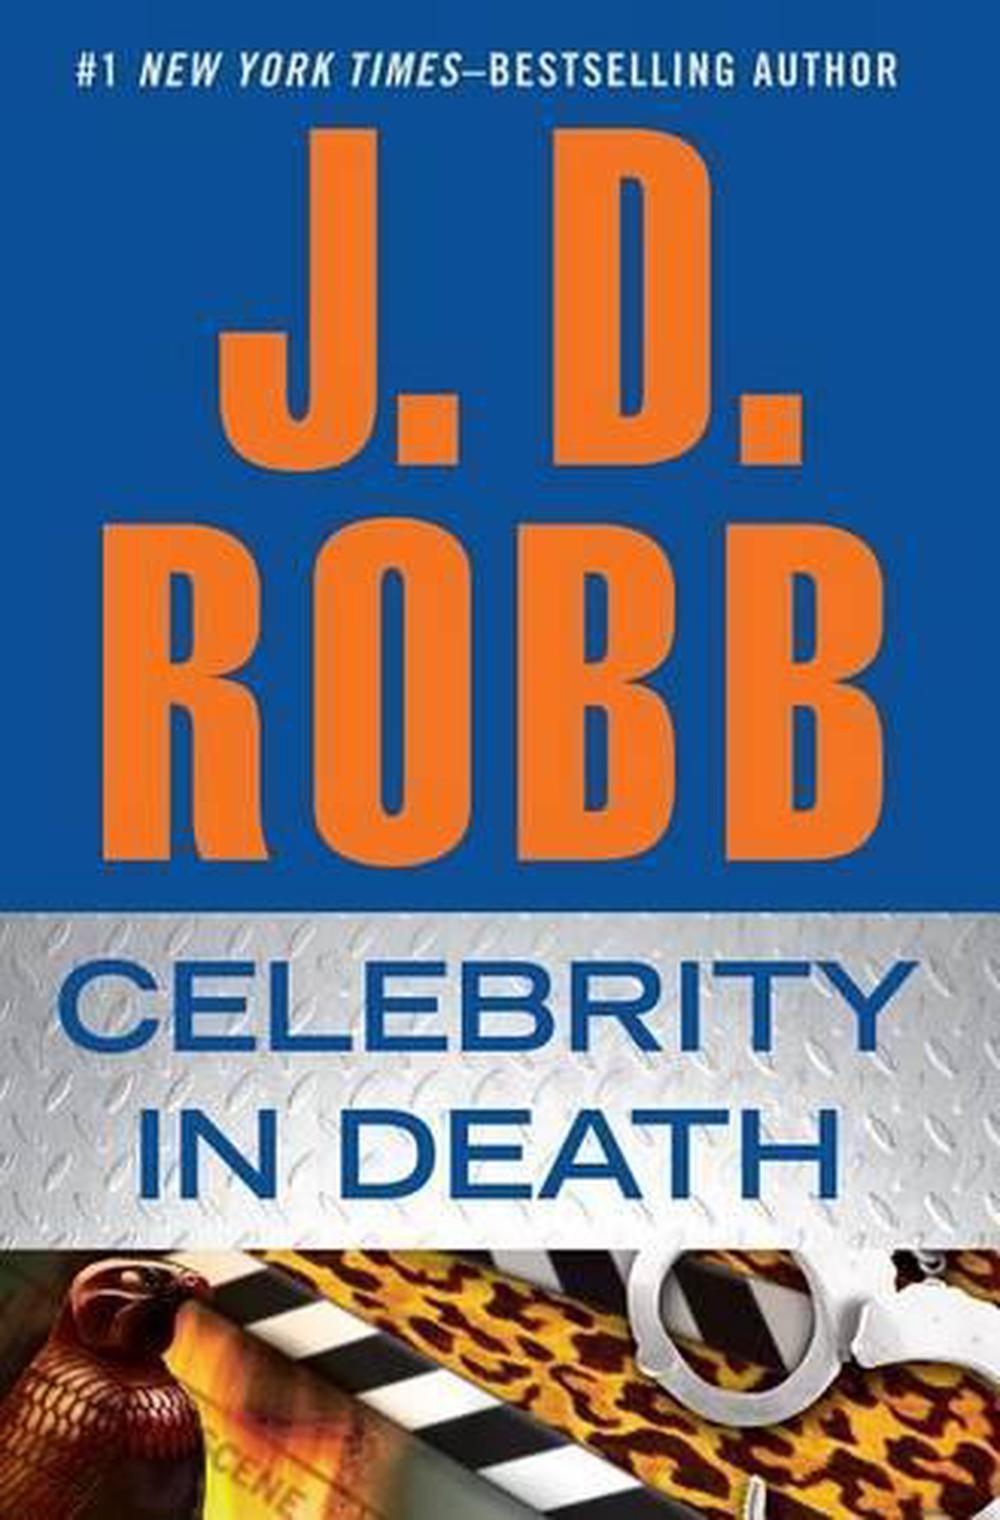 Celebrity in Death by J.D. Robb (English) Paperback Book Free Shipping